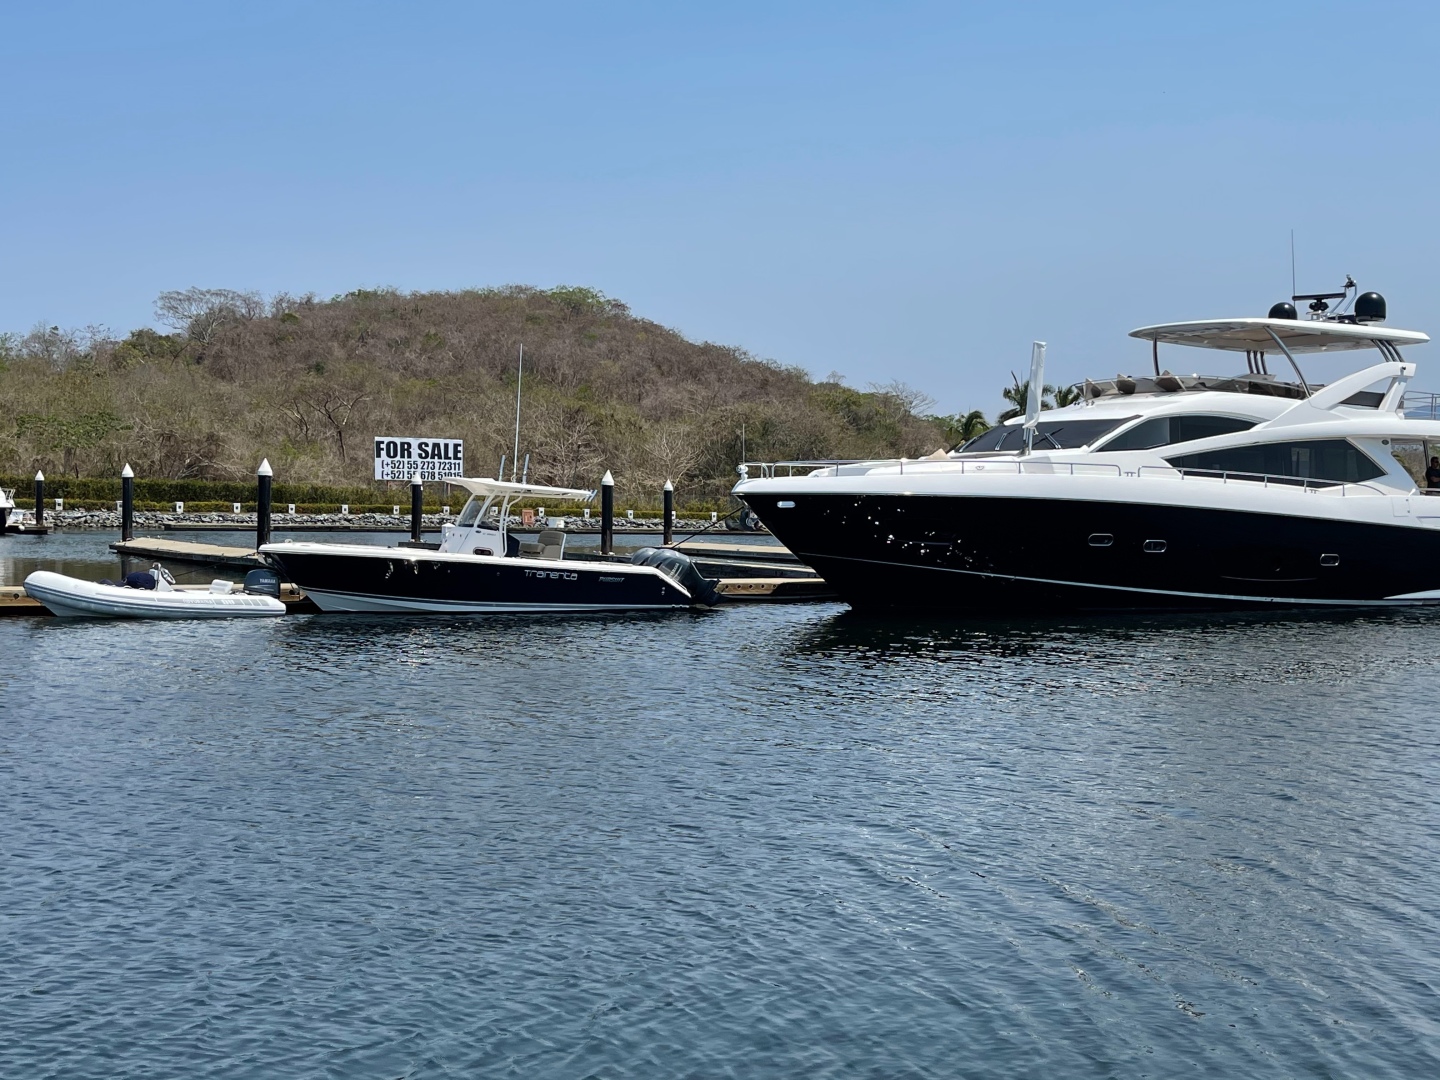 There’s Never Been a Better Time to Buy Used Yachts for Sale. Here’s Why.